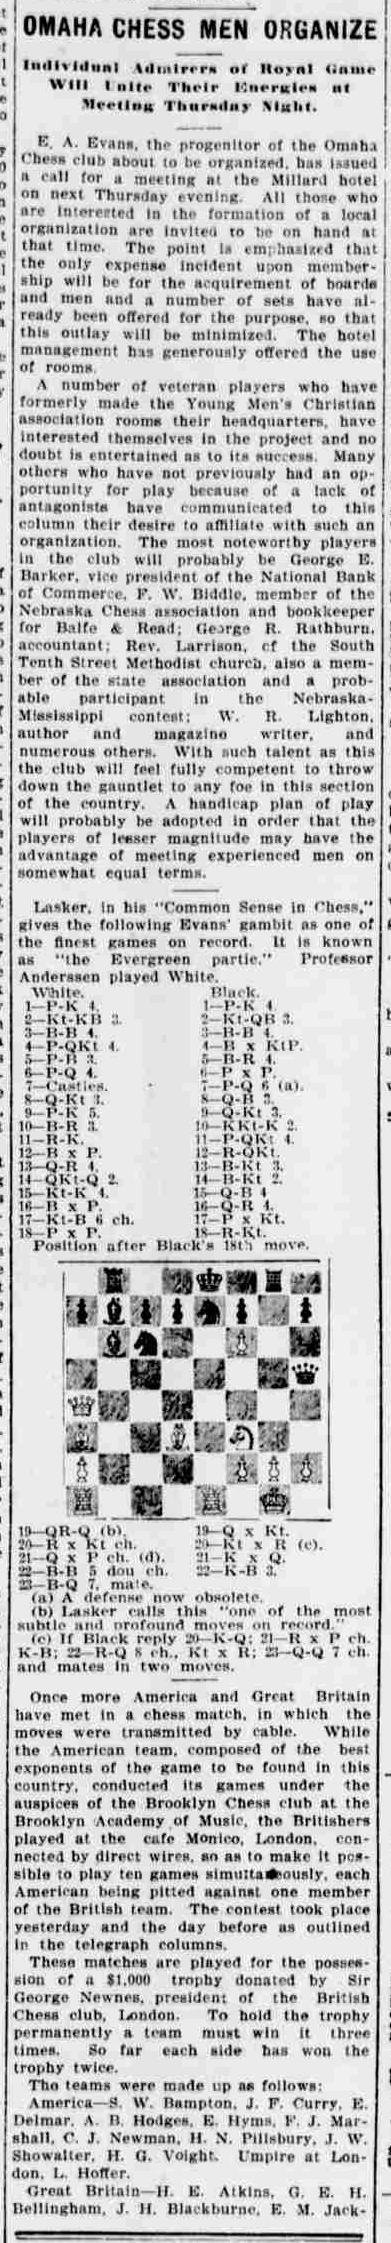 1900.03.25-01 Omaha Daily Bee.png